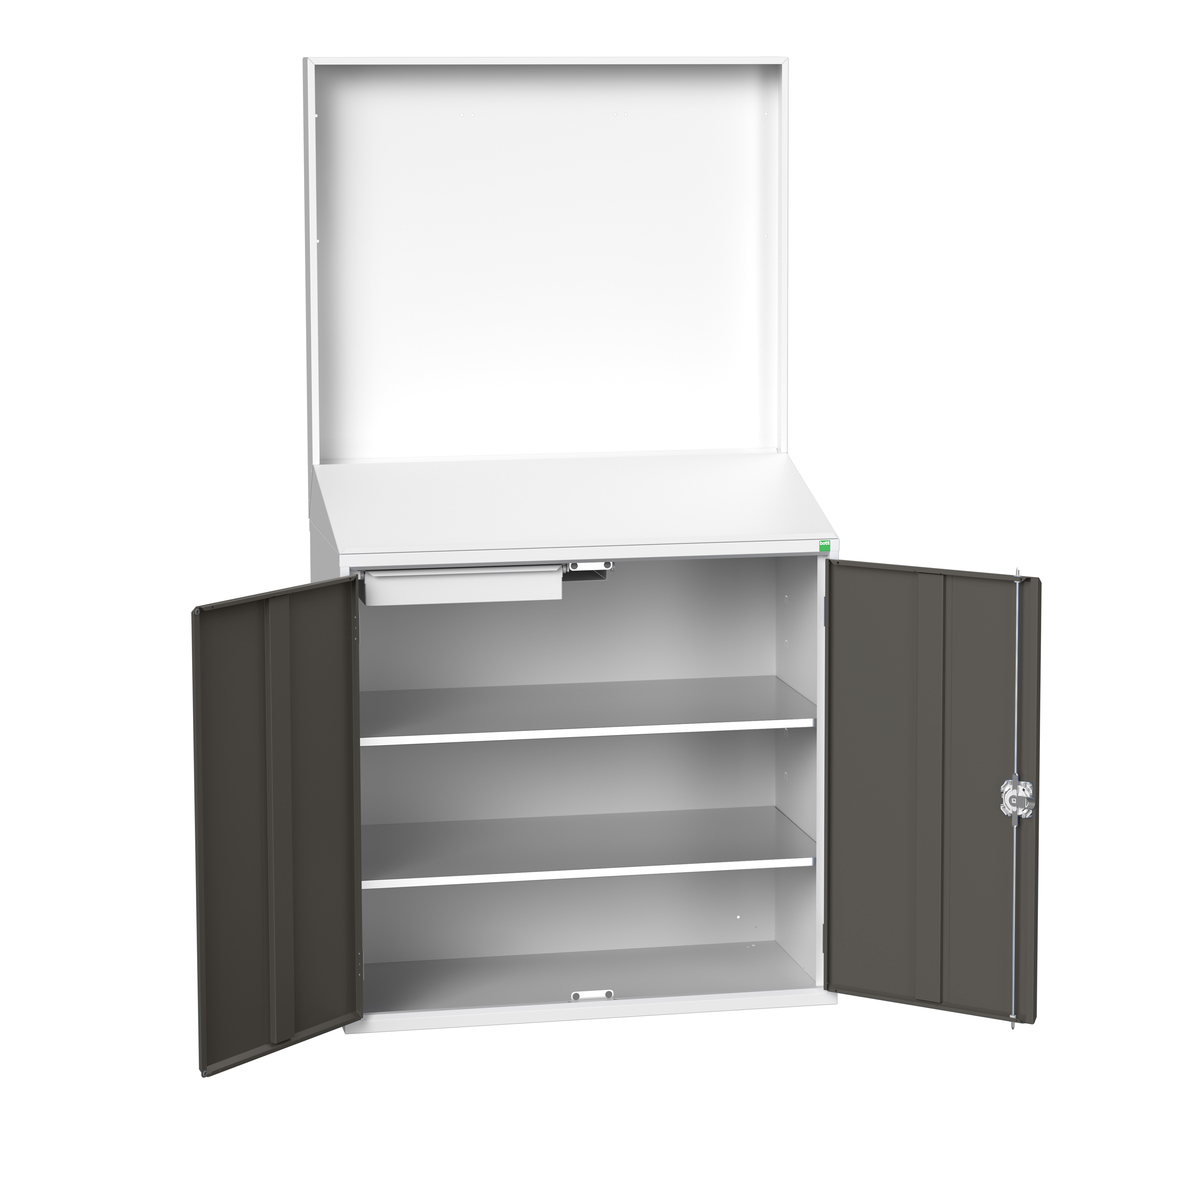 16929217. - verso economy lectern with backpanel